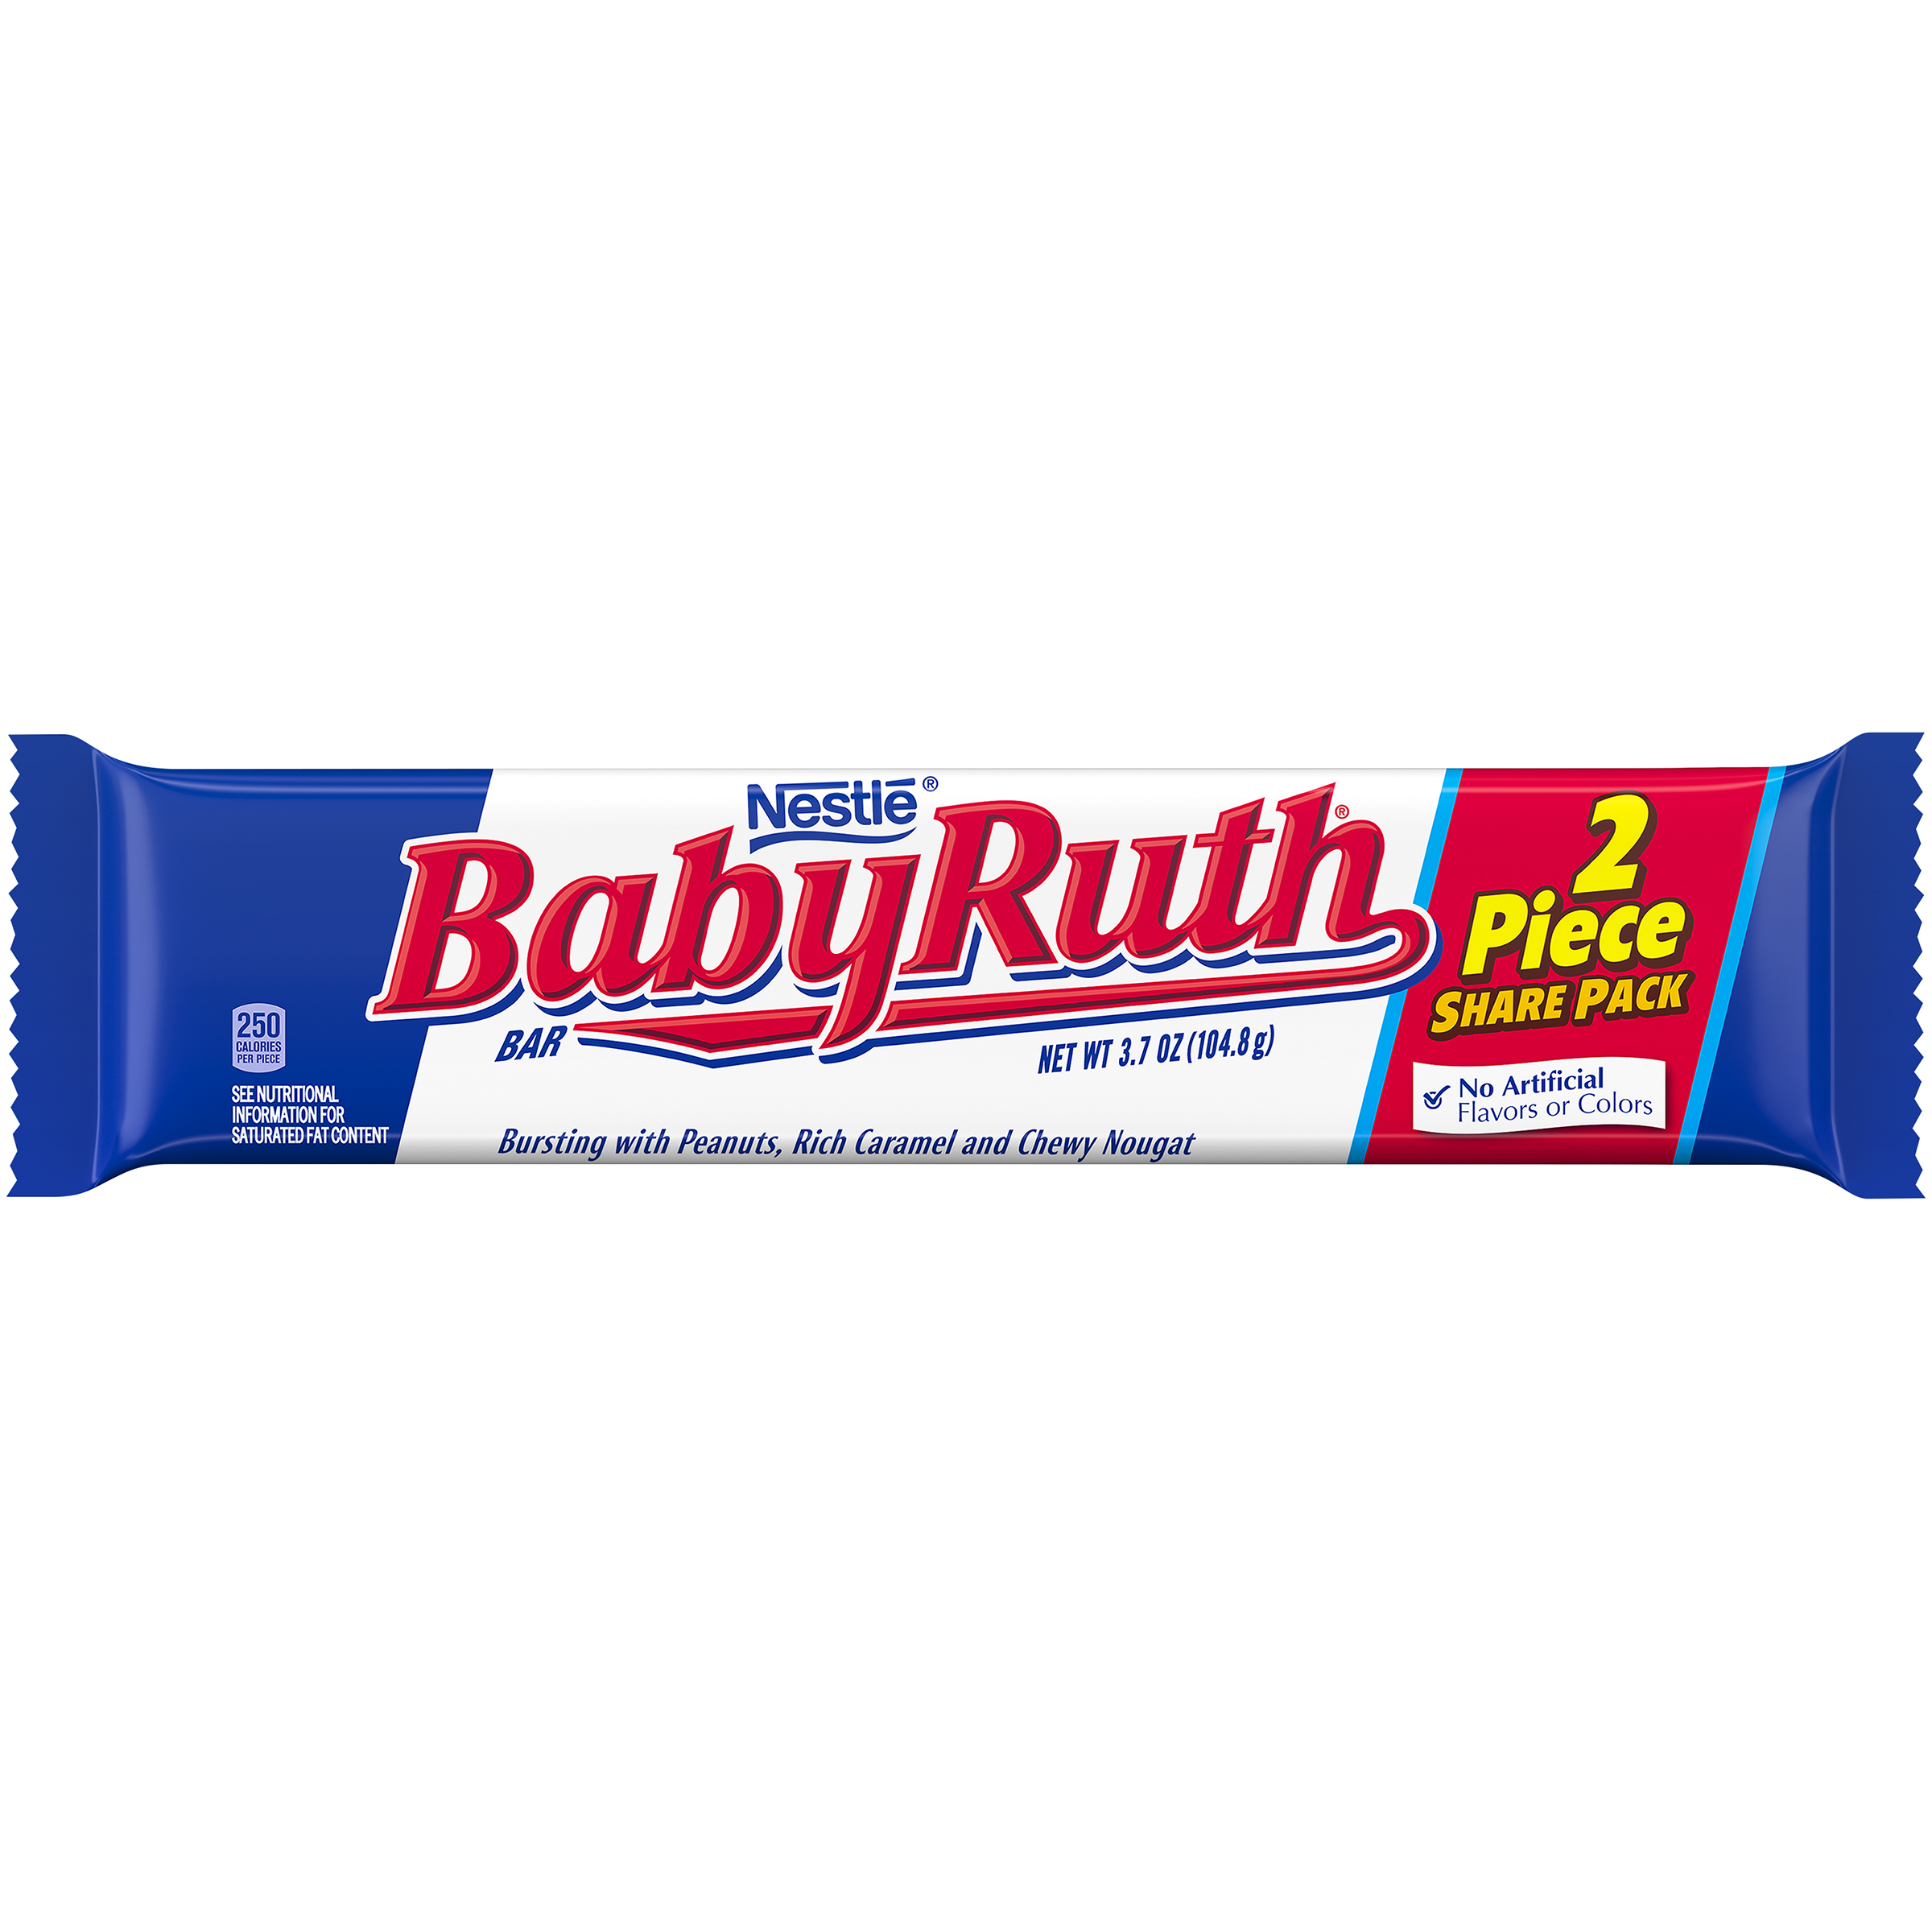 Baby Ruth Candy Bars, King Size, 3.7 oz (104.8 g)